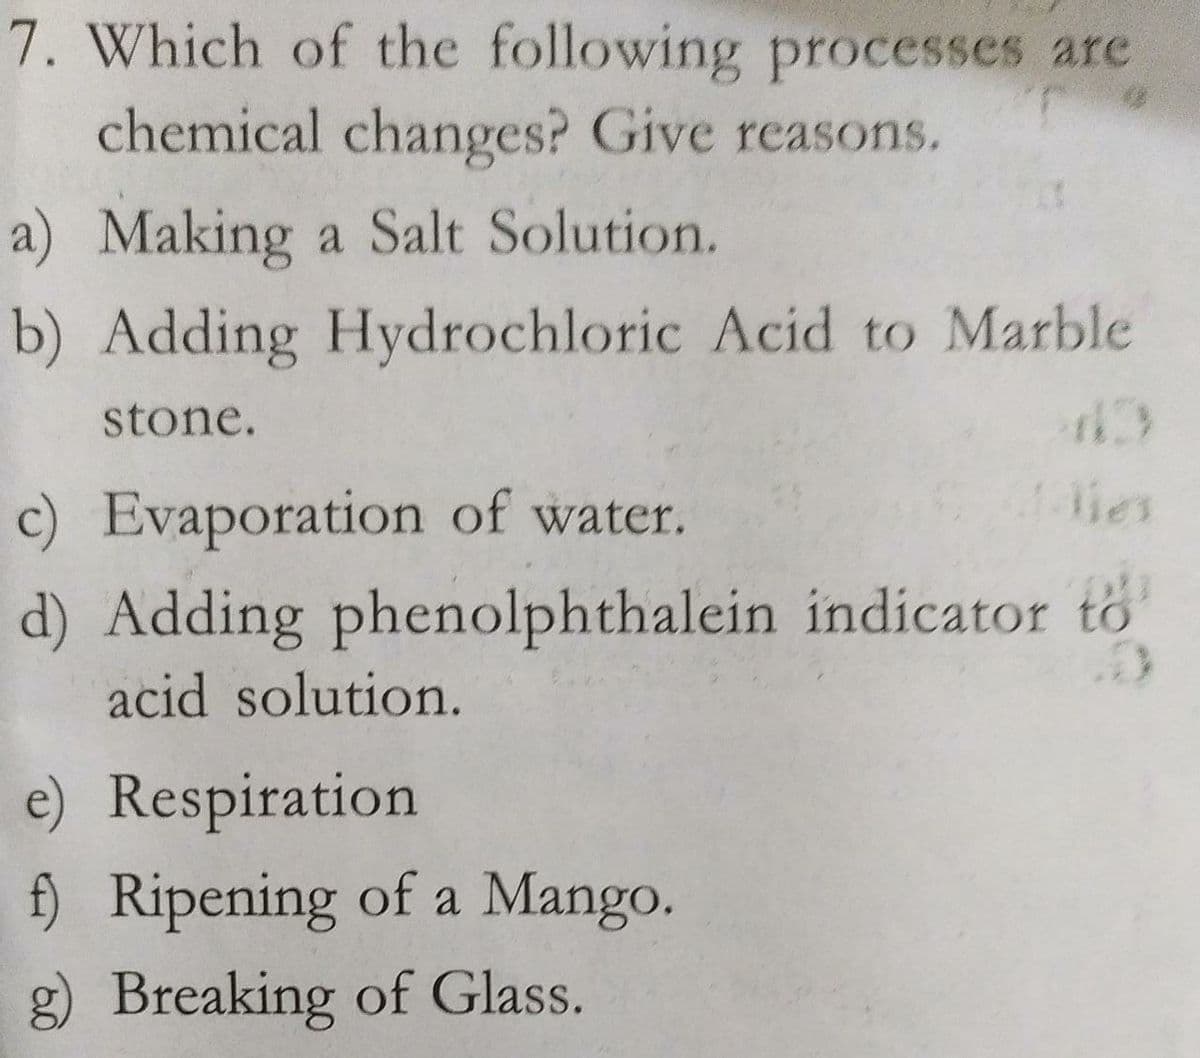 7. Which of the following processes are
chemical changes? Give reasons.
a) Making a Salt Solution.
b) Adding Hydrochloric Acid to Marble
stone.
c) Evaporation of water.
lies
d) Adding phenolphthalein indicator to
acid solution.
e) Respiration
f) Ripening of a Mango.
g) Breaking of Glass.
